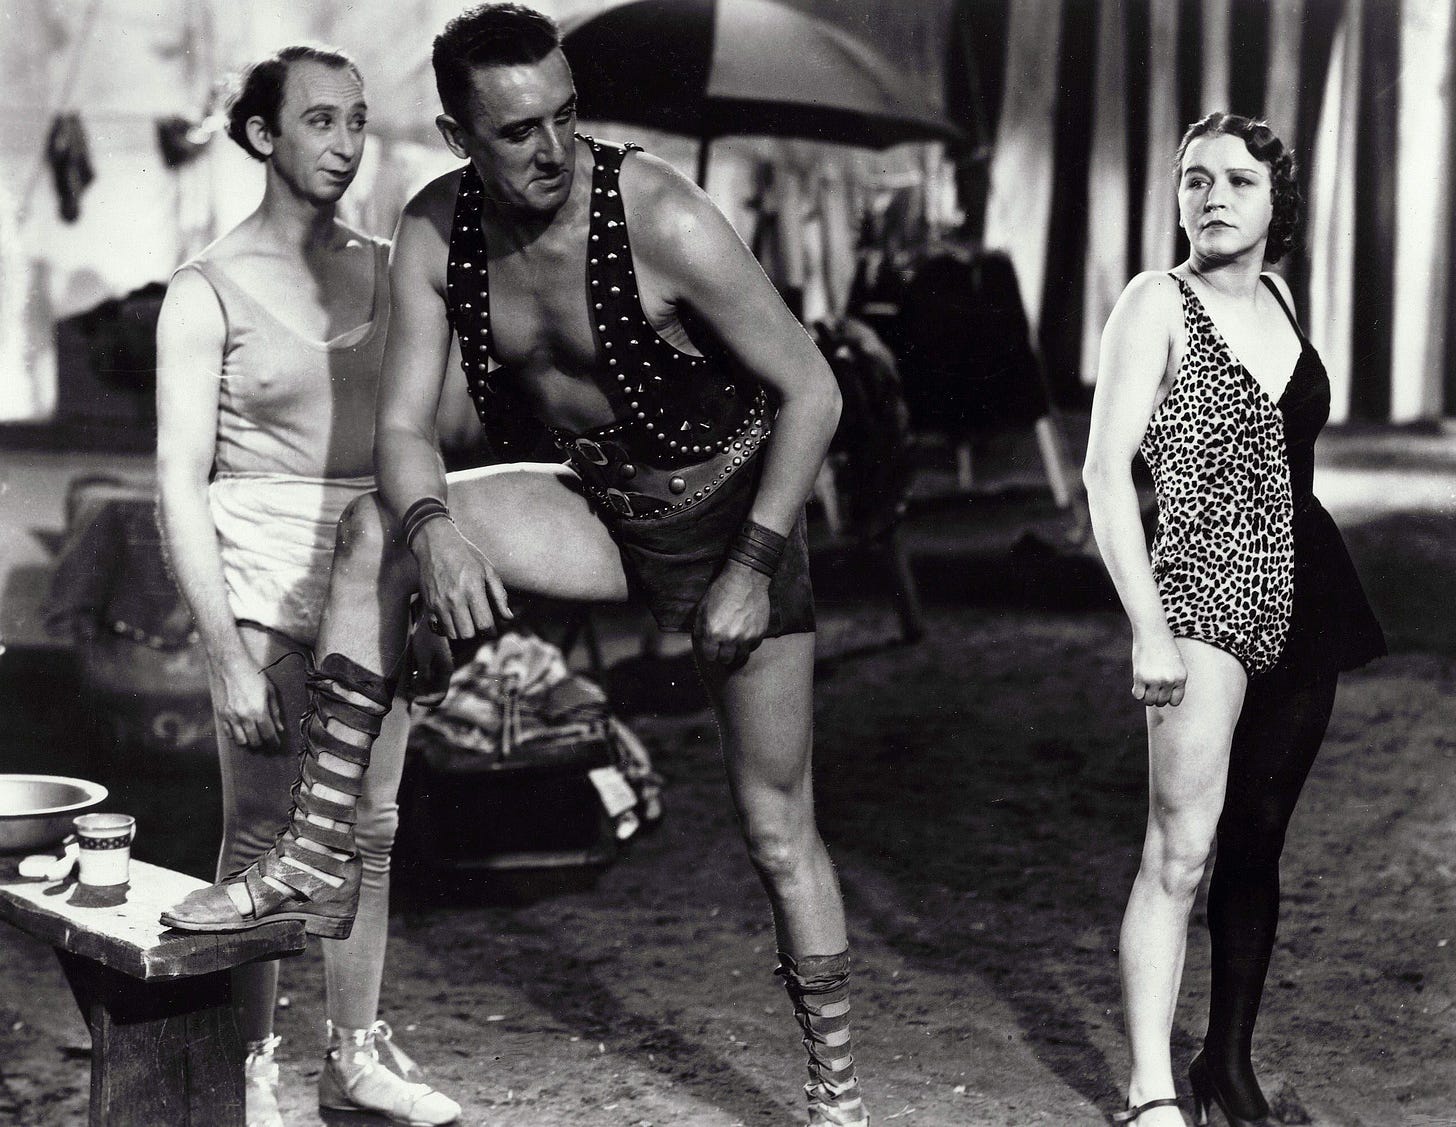  A giant strong man warms up in a still from 1932 film Freaks